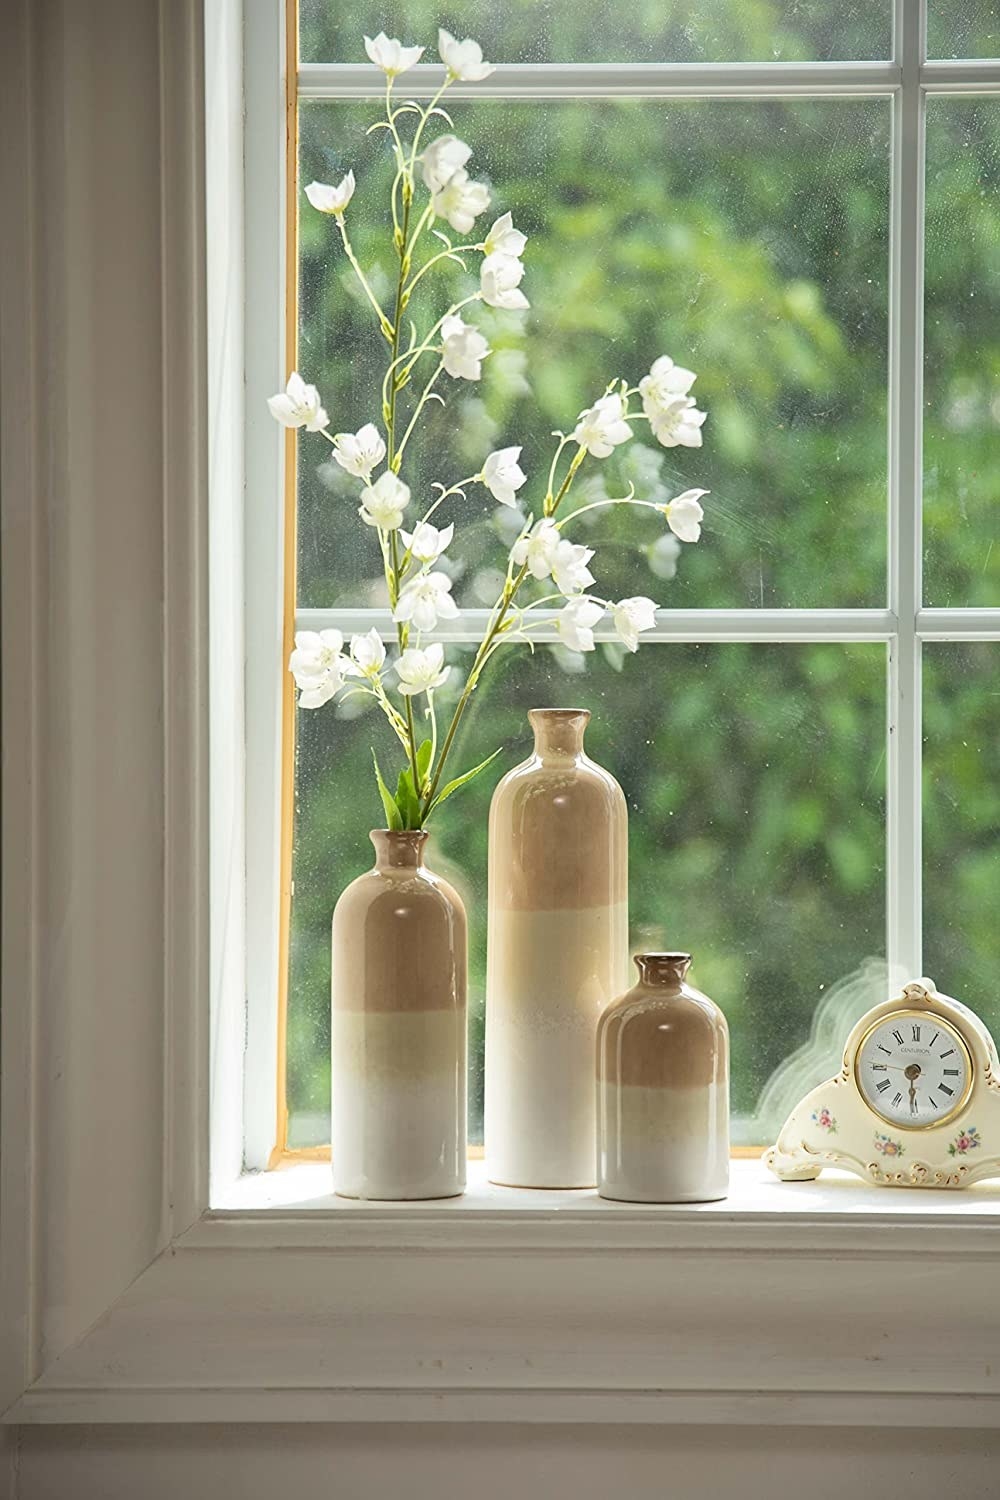 the vases on a window sill with flowers in one of them